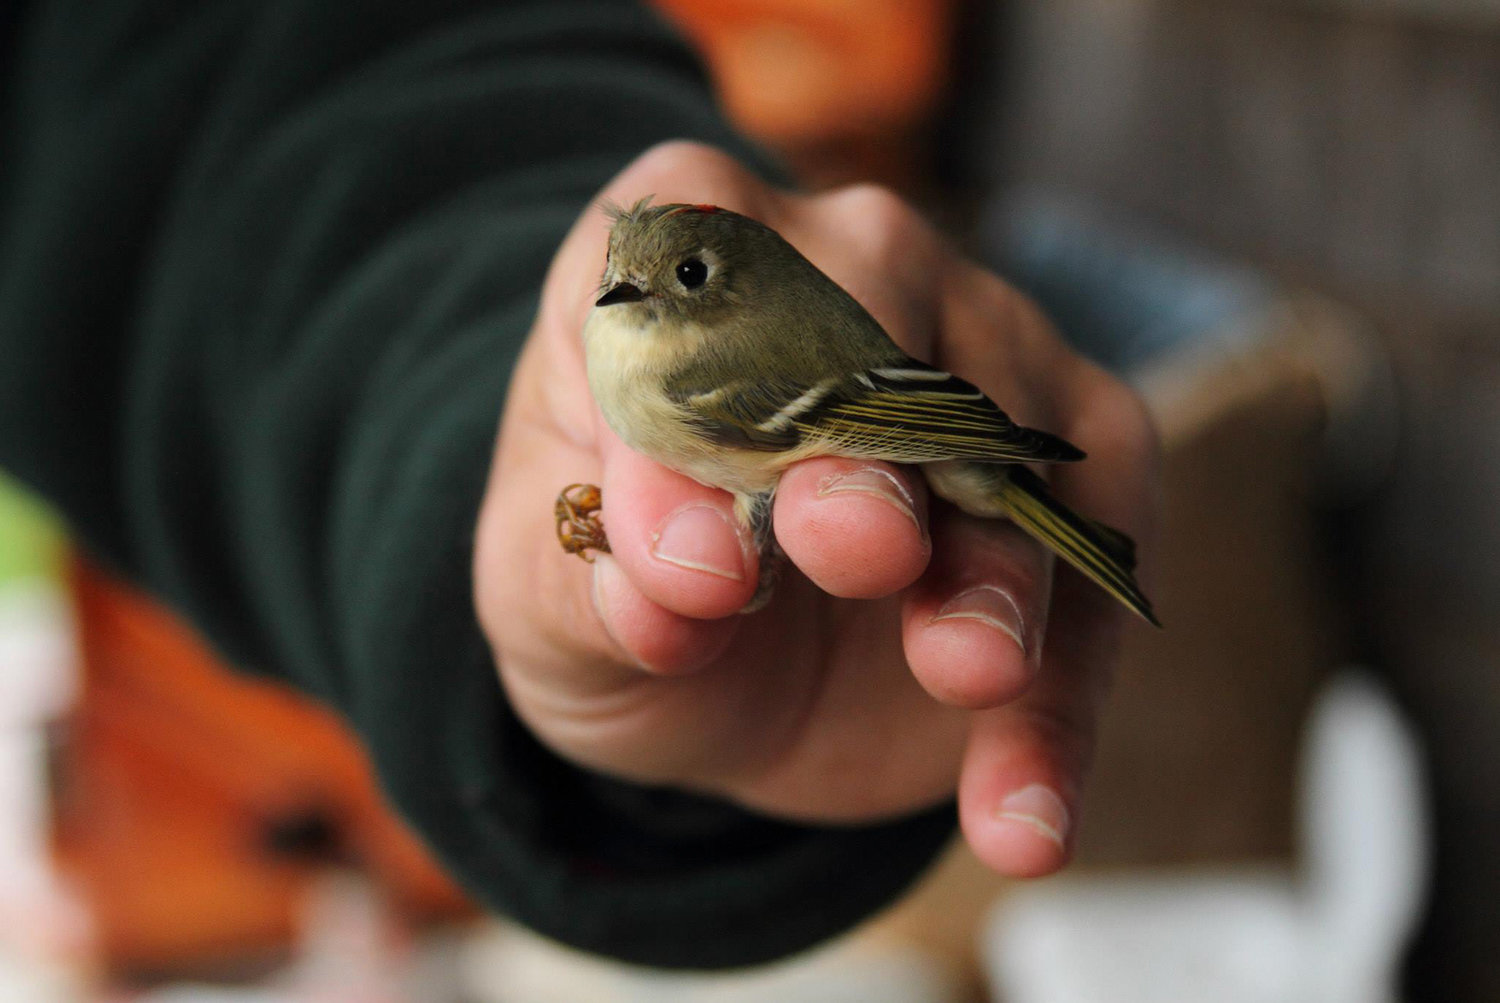 The Nature Conservancy conducts bird banding to keep track of the island's species